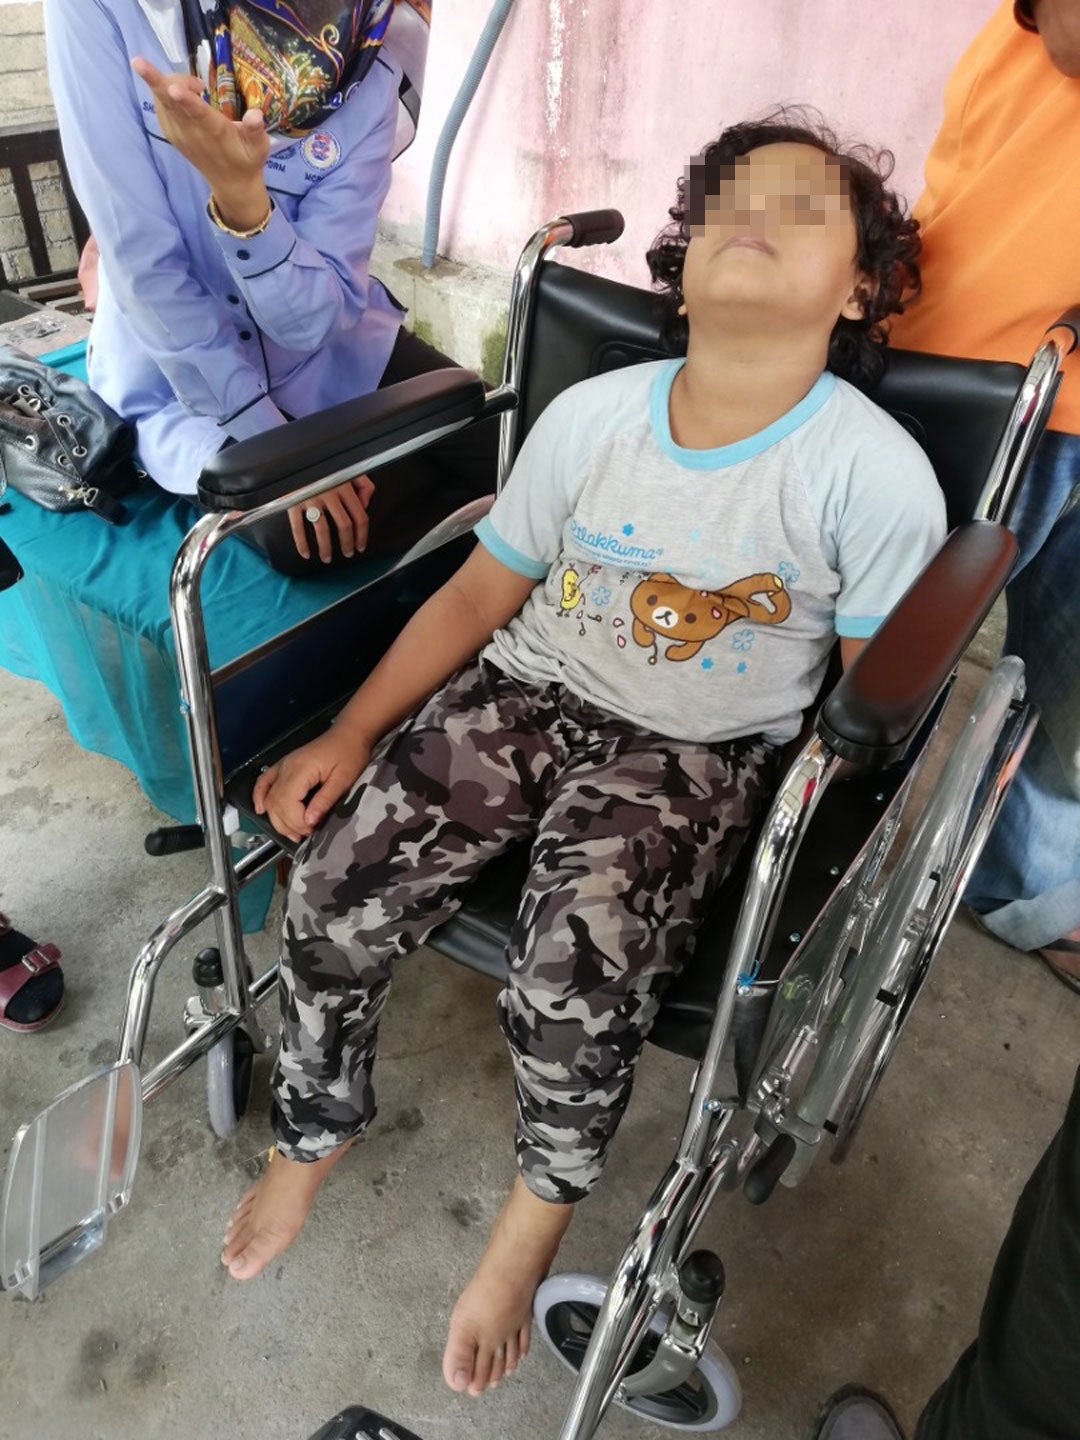 9-Year-Old Kedah Girl Beaten Up By School Bullies, Ends Up In A Wheelchair - WORLD OF BUZZ 7